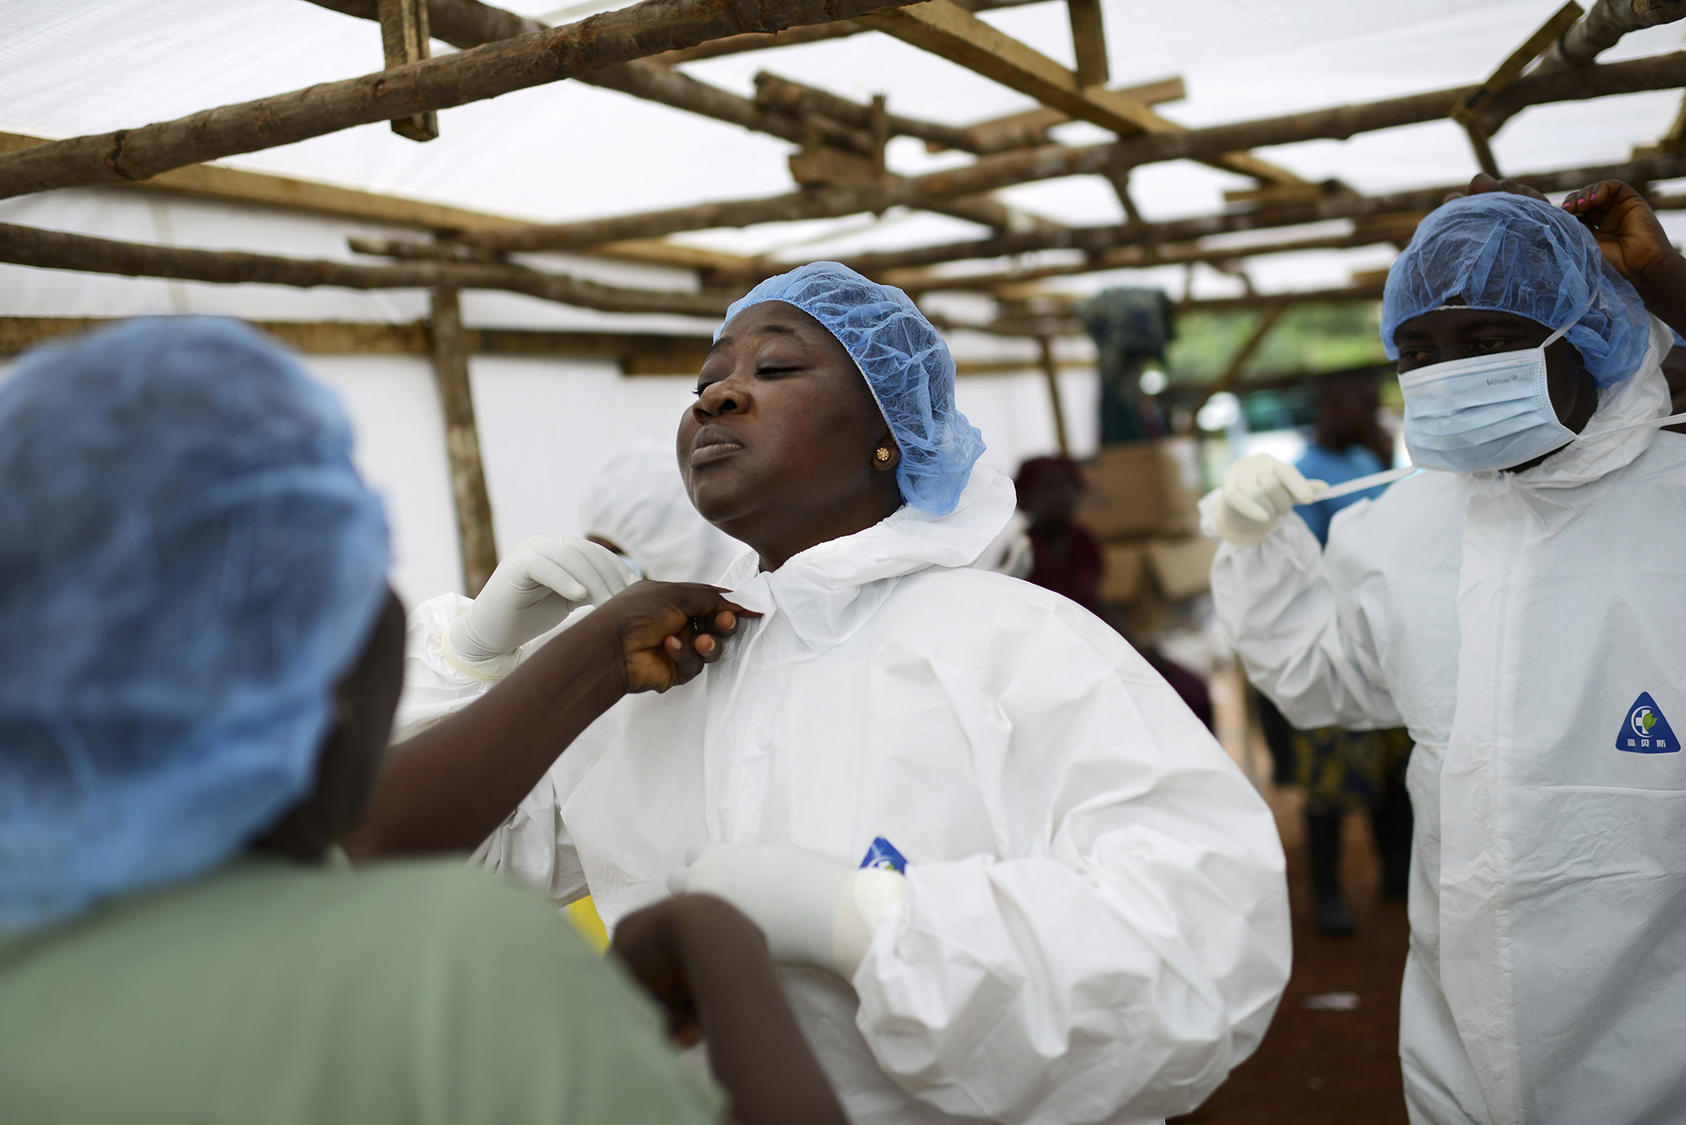 Josephine Finda Sellu, deputy nurse matron at a government hospital, before going into the isolation area for Ebola patients, in Kenema, Sierra Leone, Aug. 20, 2014. (Samuel Aranda/The New York Times)